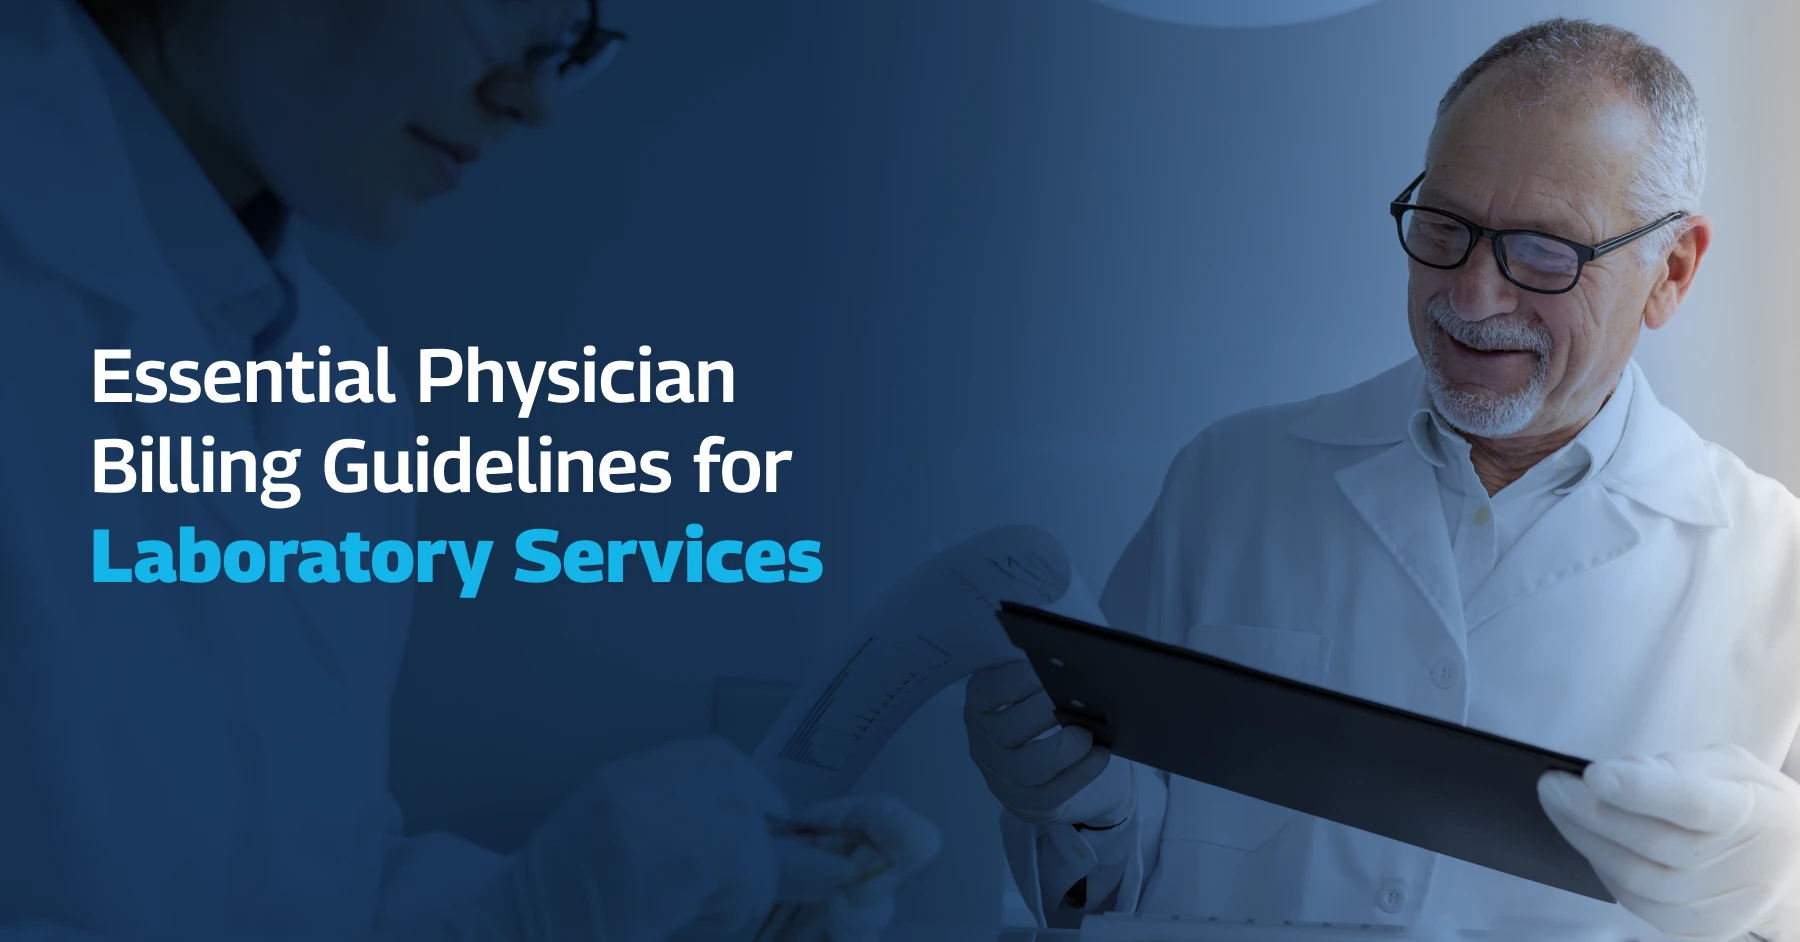 You are currently viewing 7+ Essential Physician Billing Guidelines for Laboratory Services